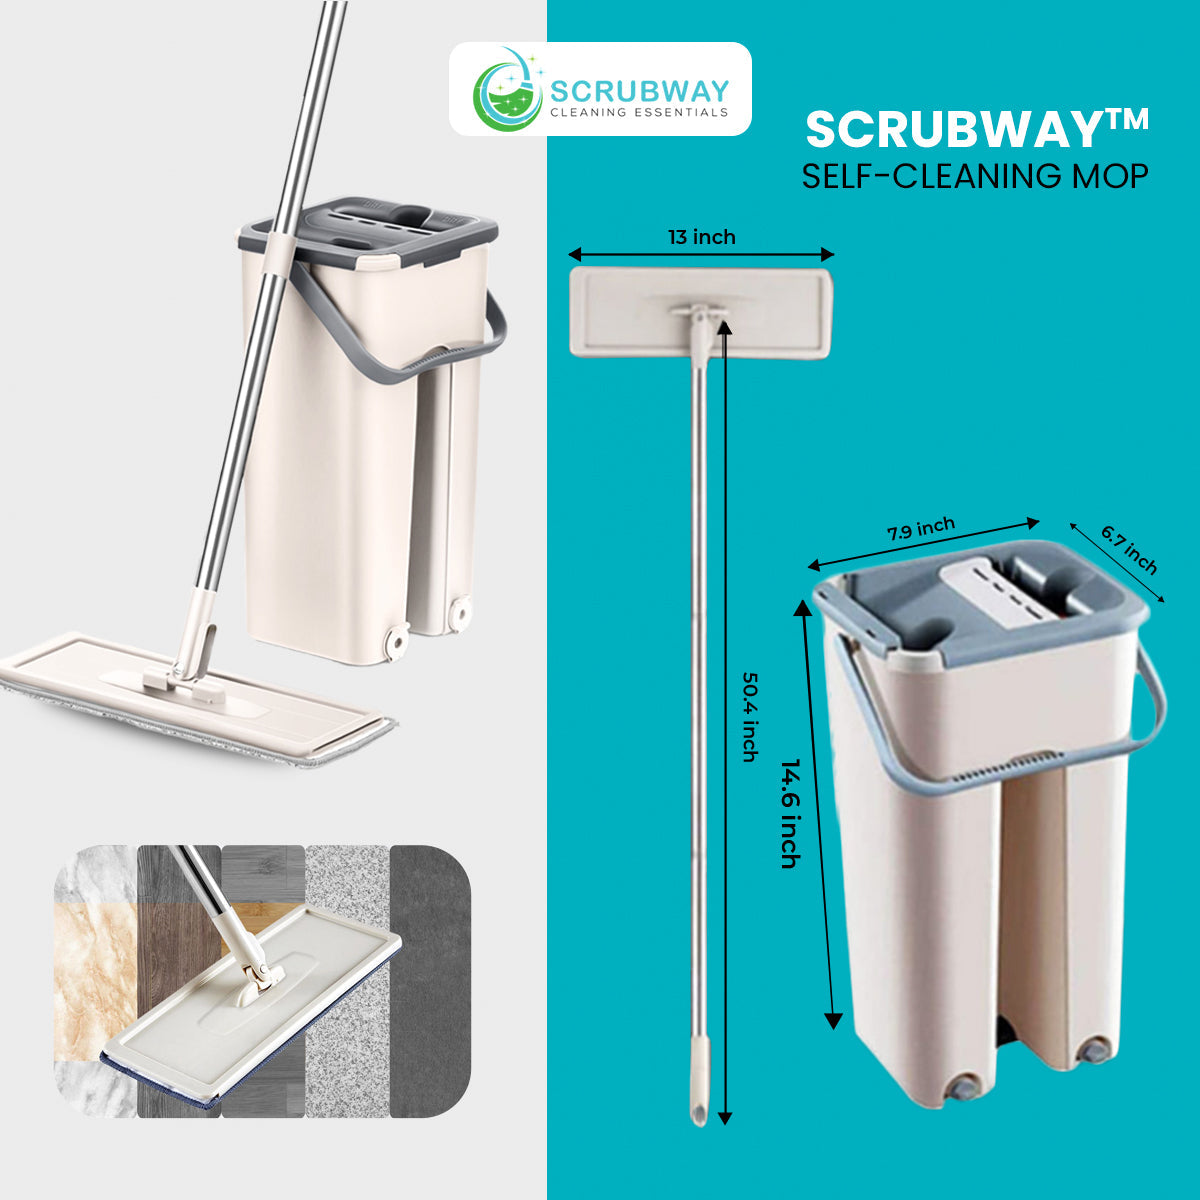 Self cleaning mop 2. Торговая марка: HAUSWELL Smart Mop. Швабра HAUSWELL, длина 130 см. Self-Cleaning.